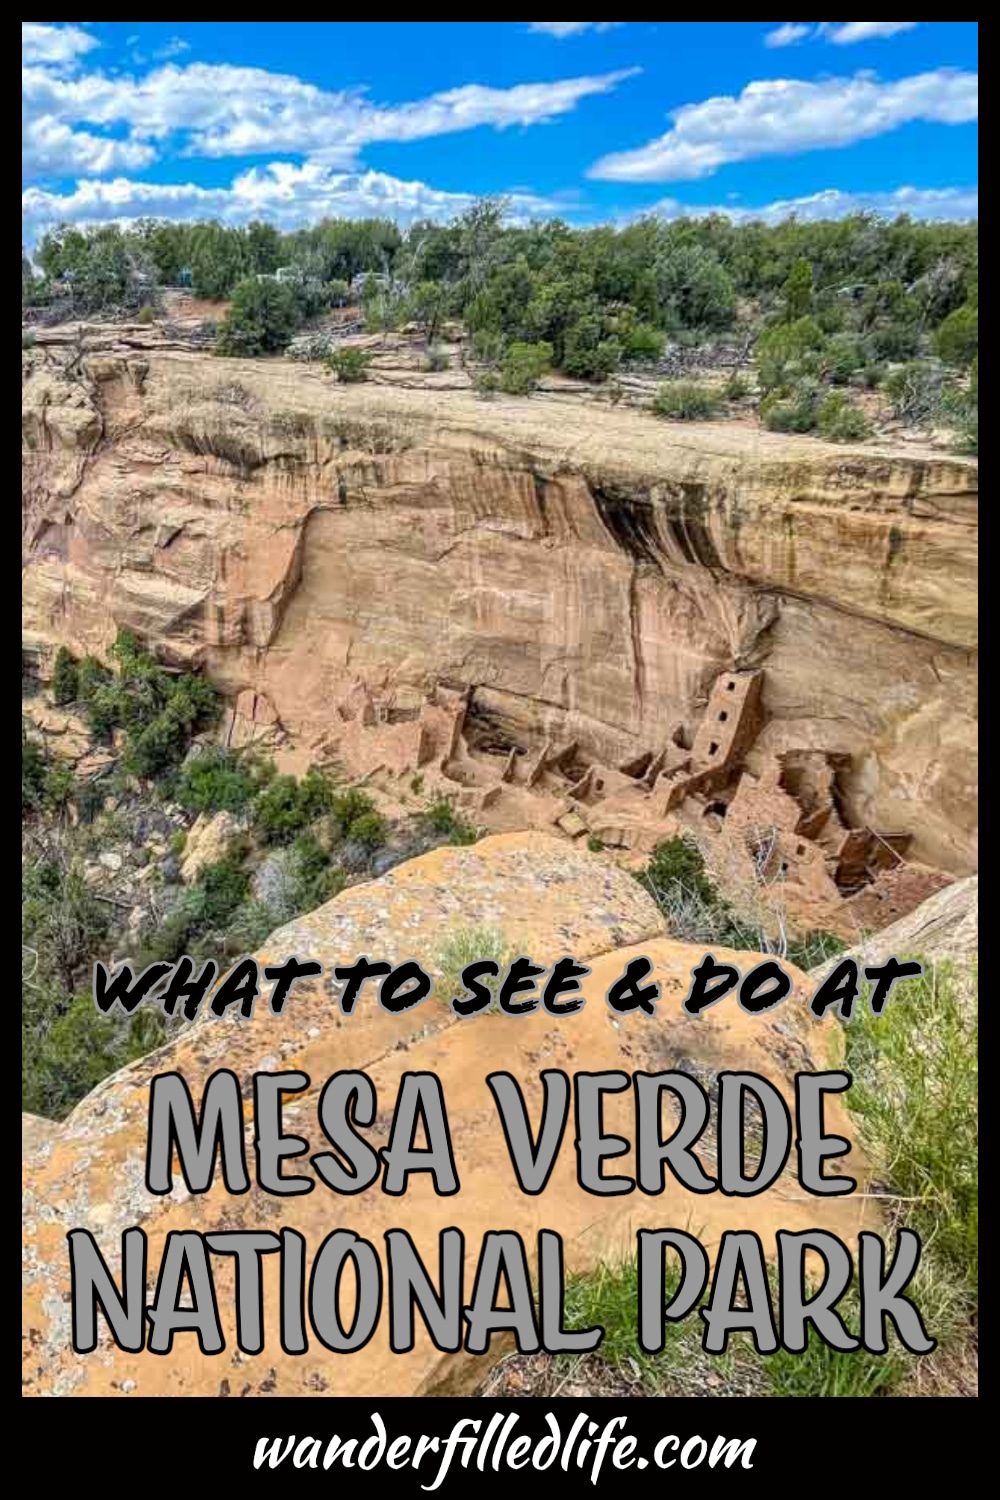 Our tips for visiting Mesa Verde National Park will help you understand the seasonal closures and what you need advance reservations for.